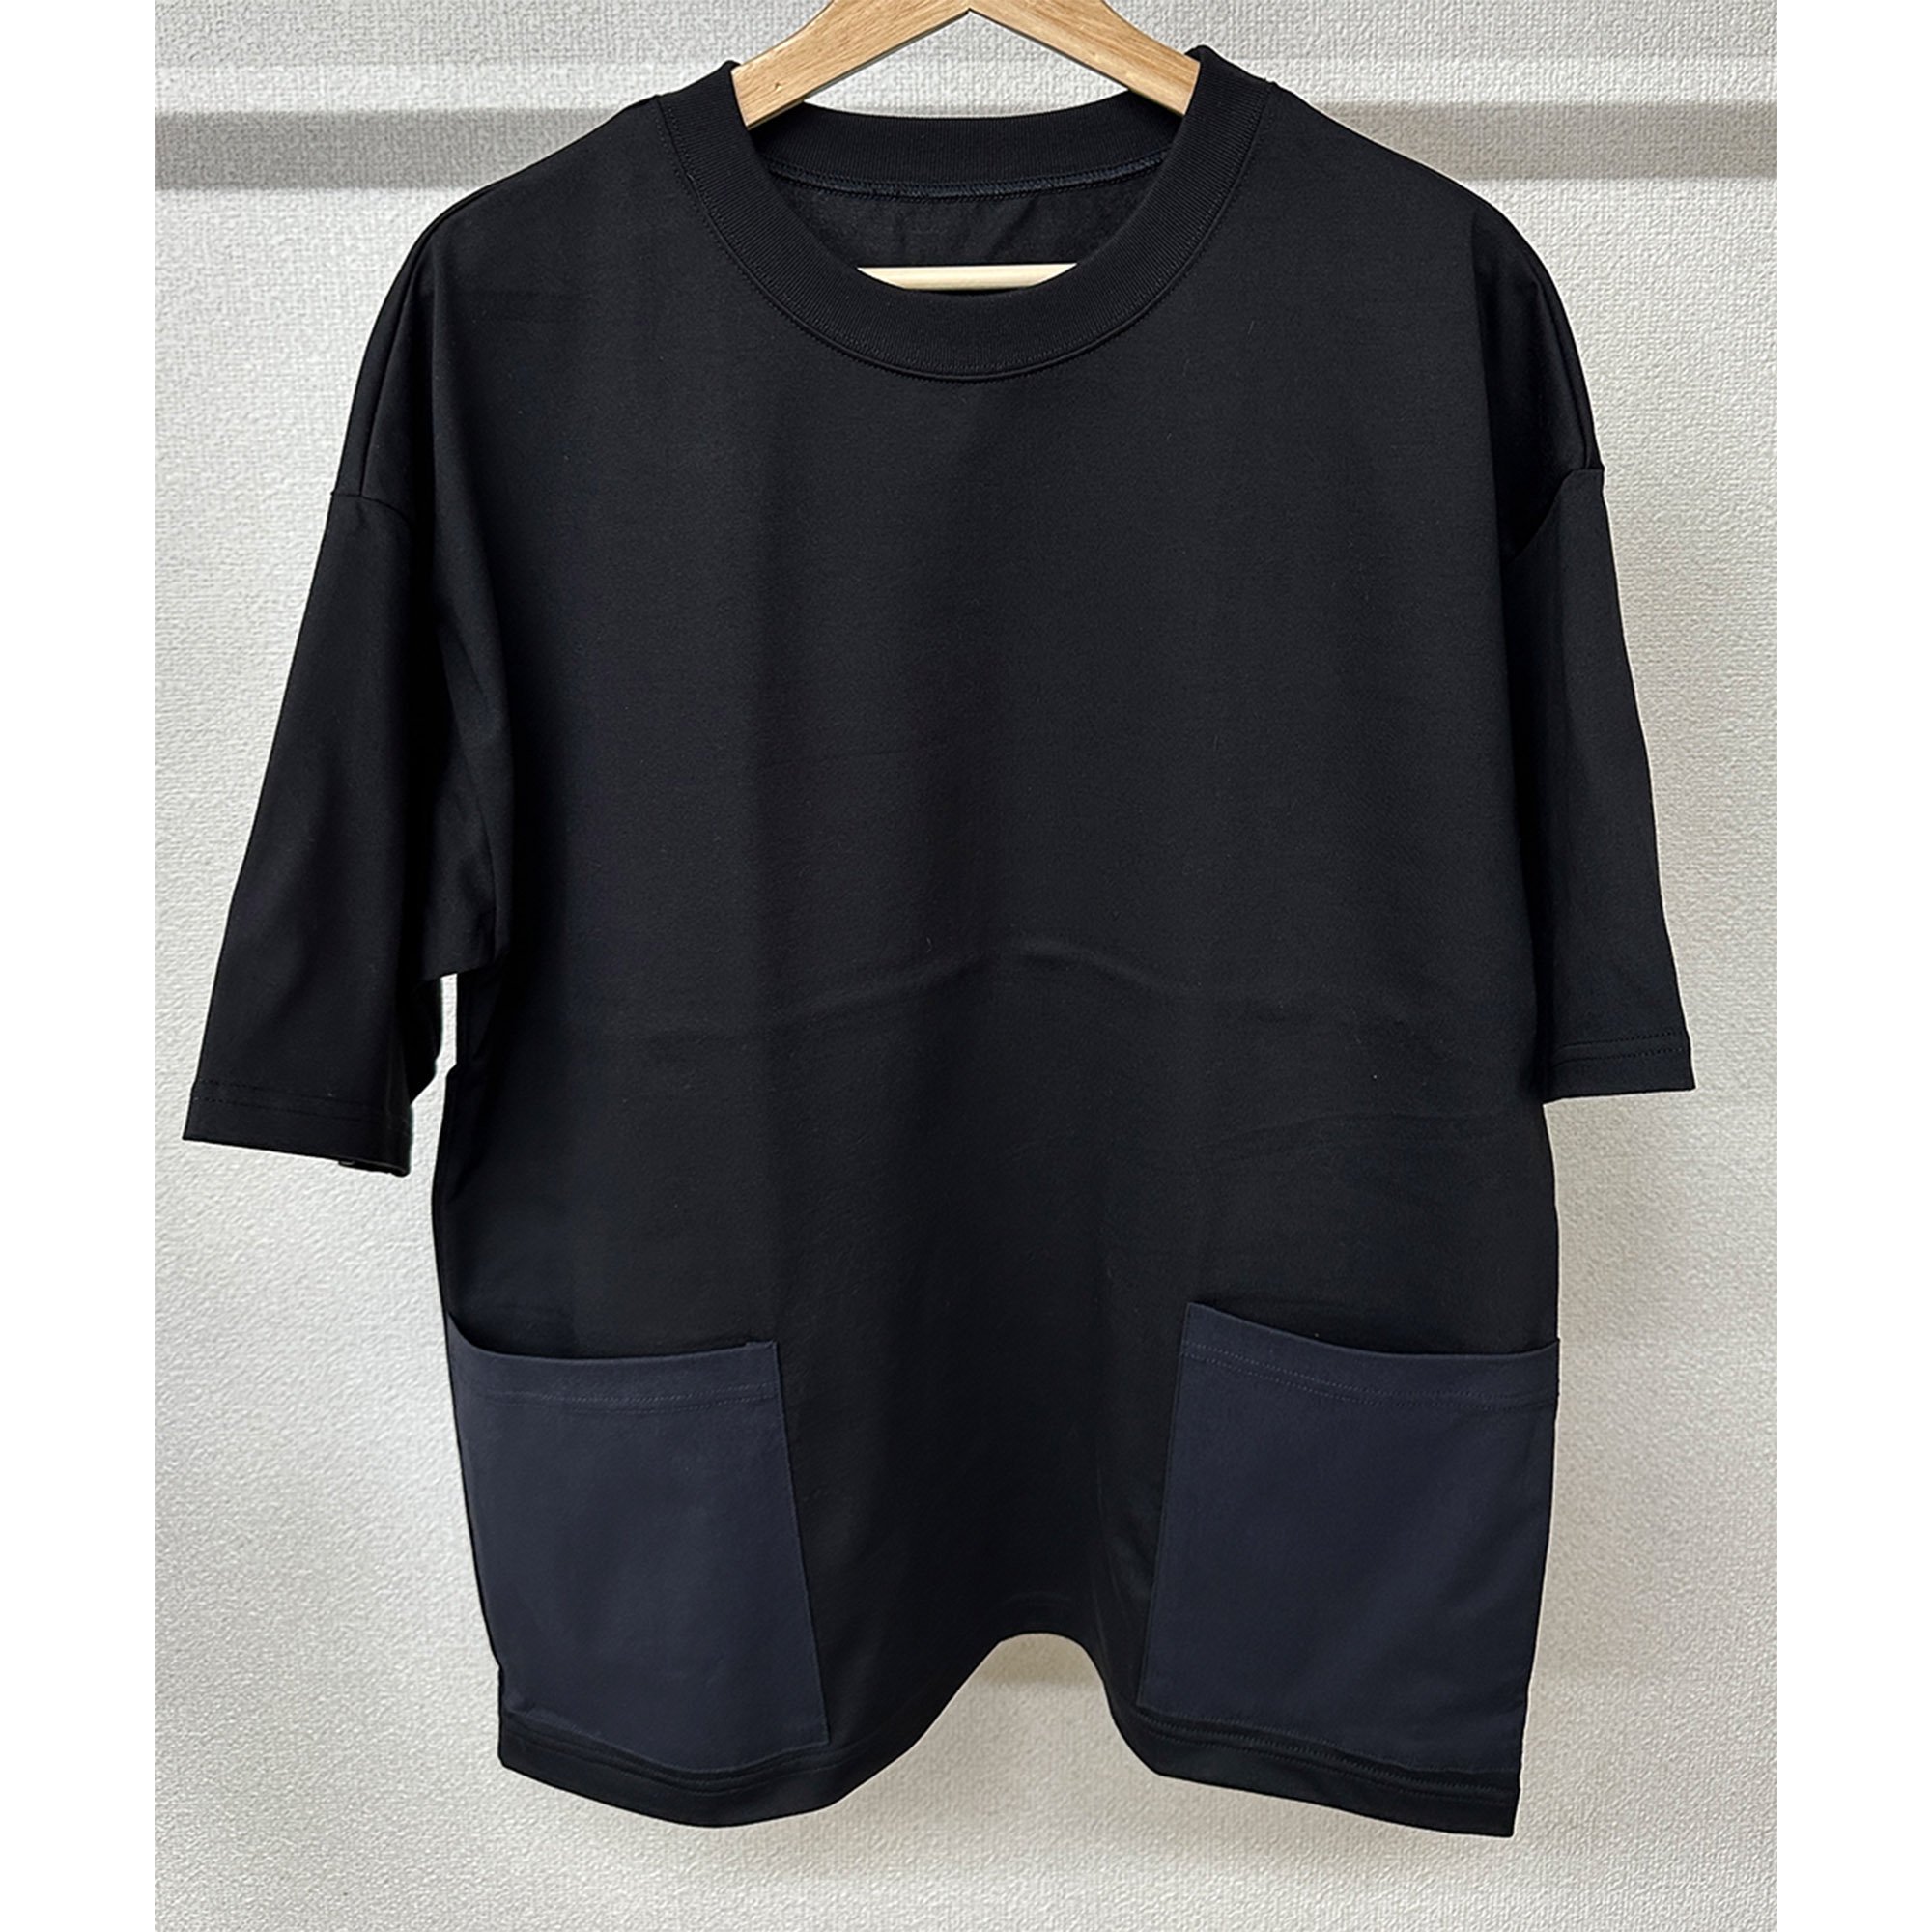 <img class='new_mark_img1' src='https://img.shop-pro.jp/img/new/icons1.gif' style='border:none;display:inline;margin:0px;padding:0px;width:auto;' />SIDE POCKET OVER TEE BLACK